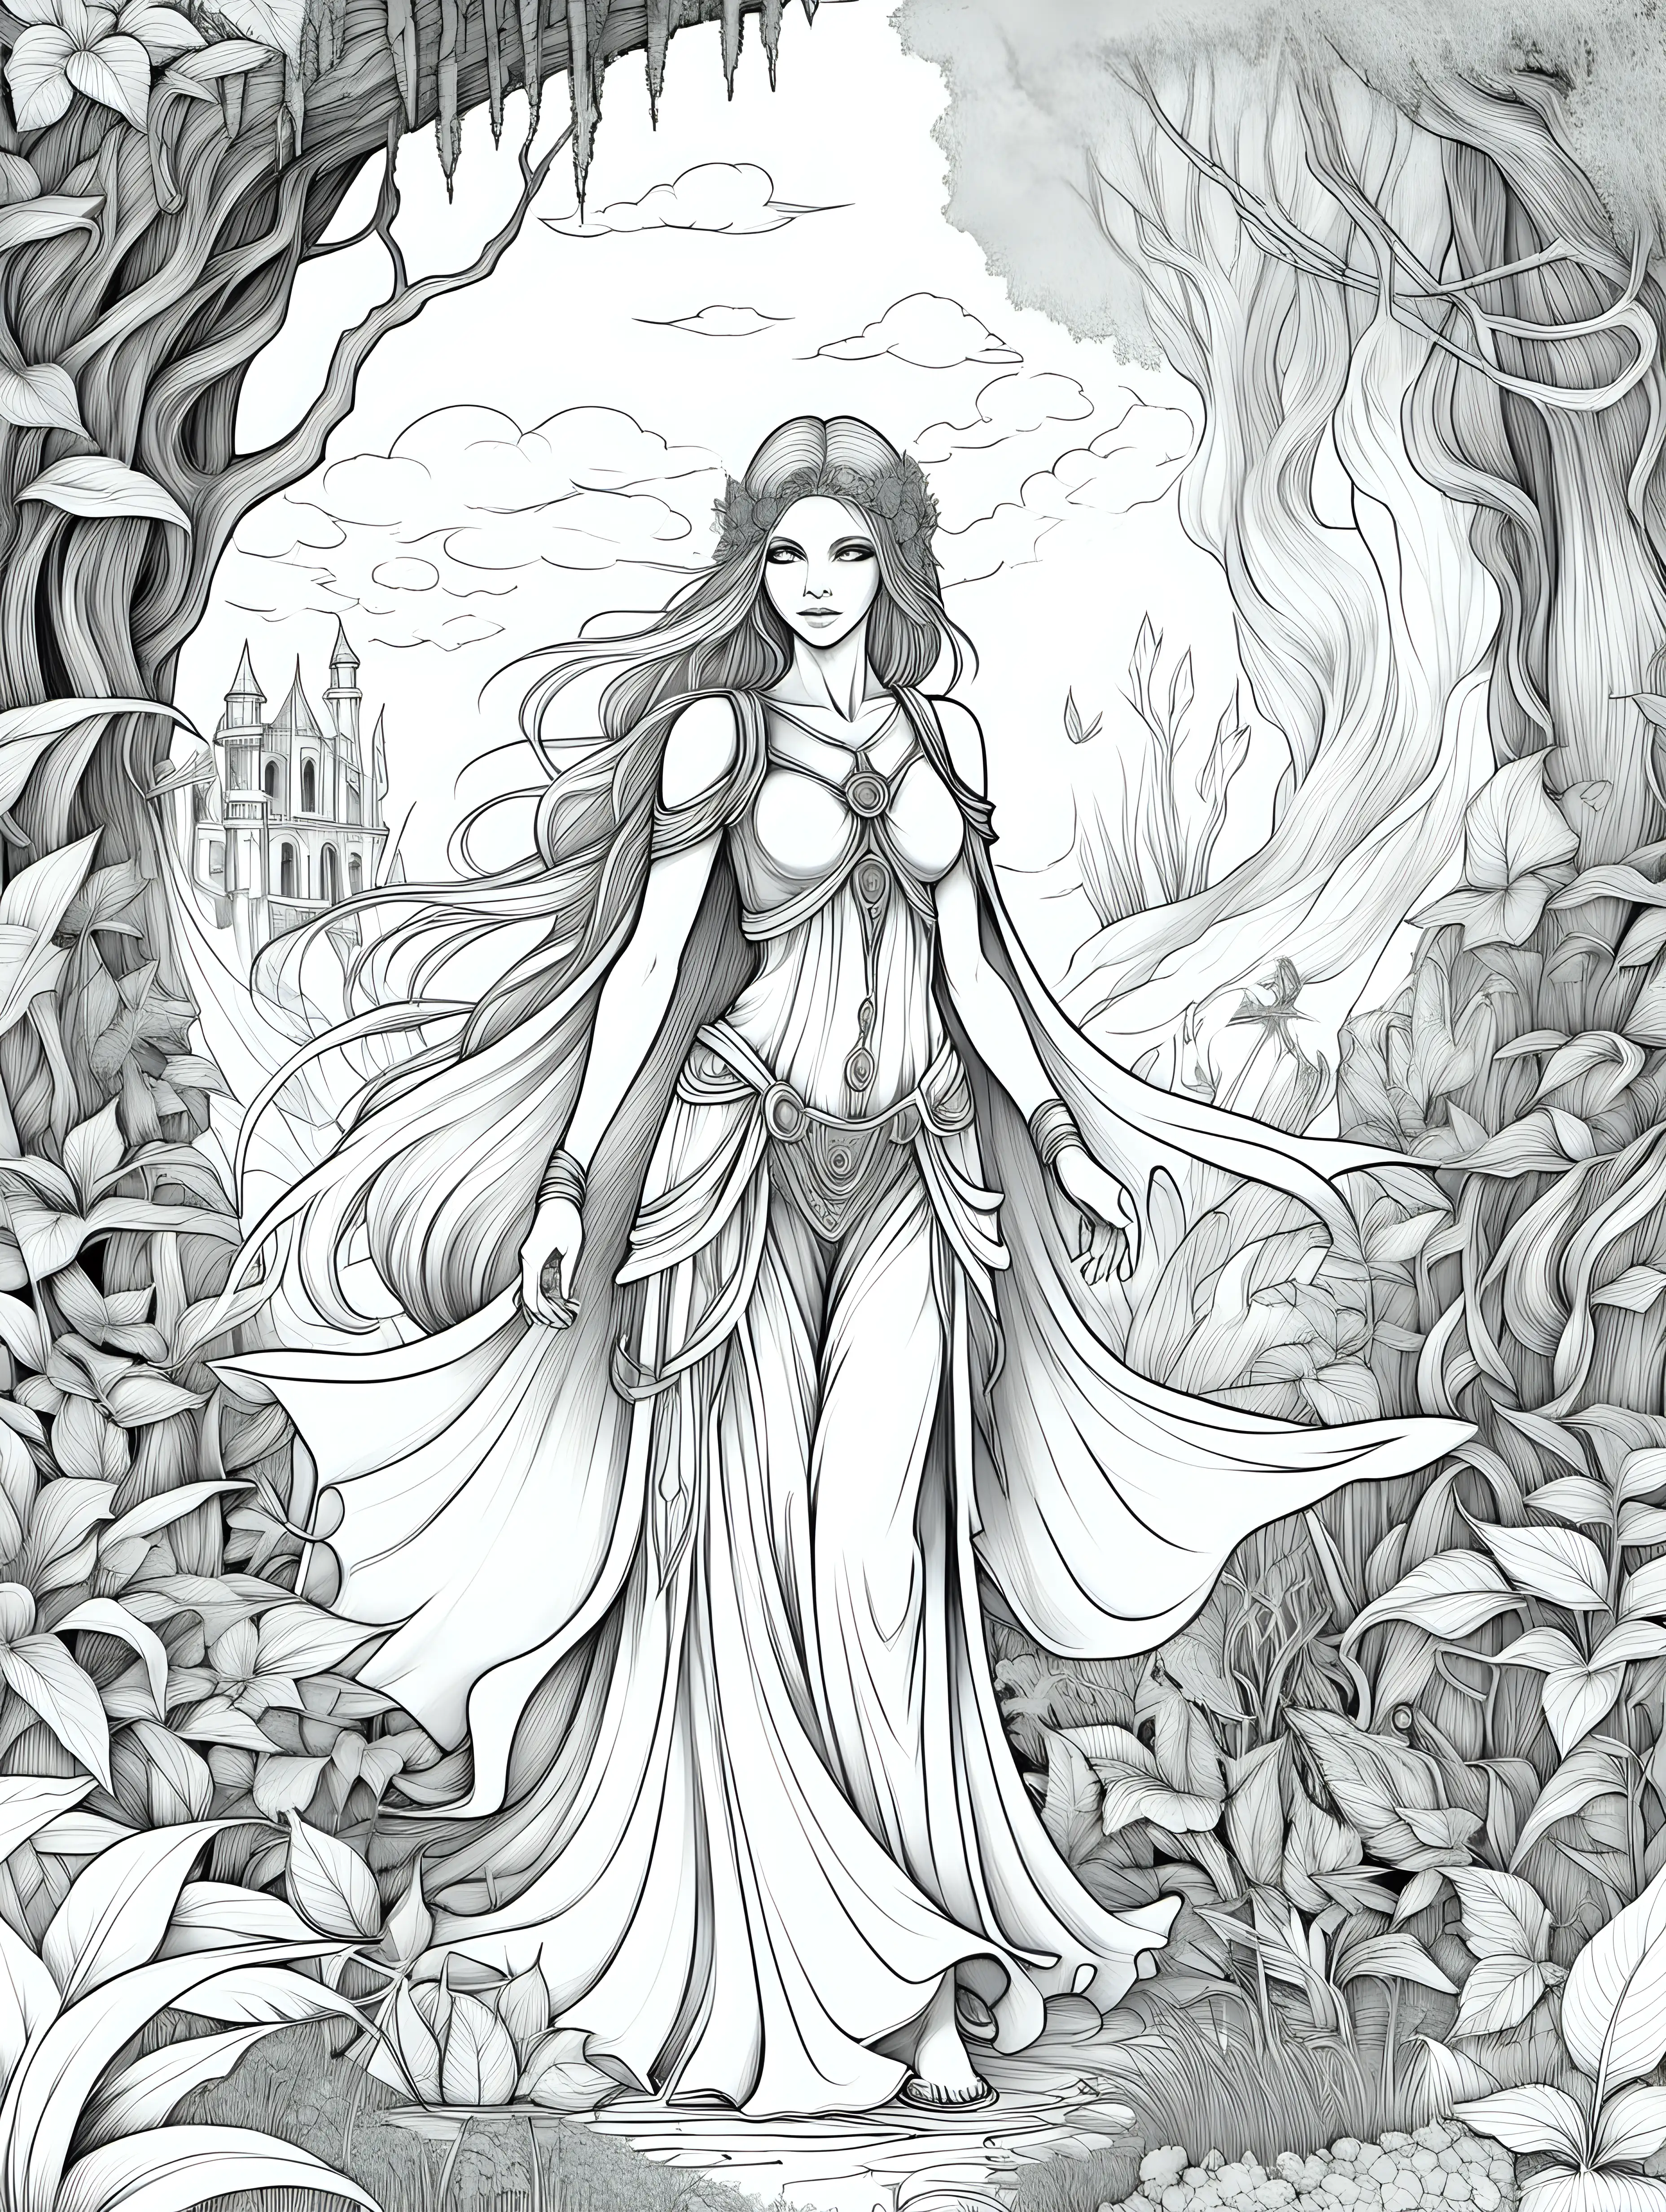 Enchanting Fantasy World Coloring Page Featuring a Driad